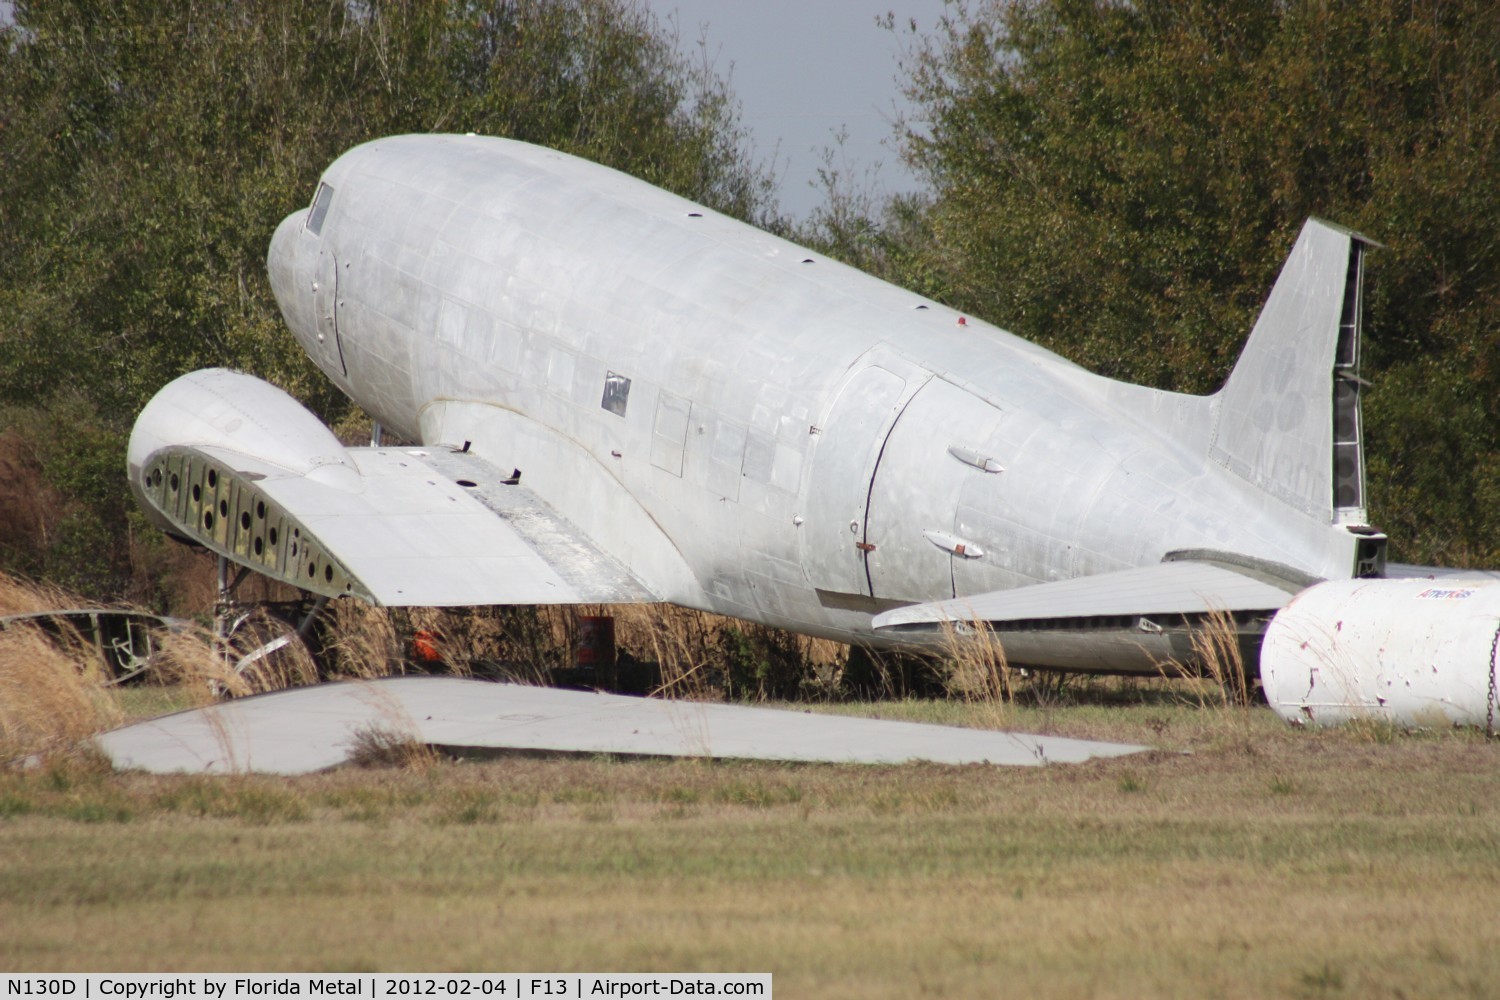 N130D, 1943 Douglas DC3C-S4C4G C/N 19800, Douglas C-47 missing wings after Hurricane Charley back in 2004